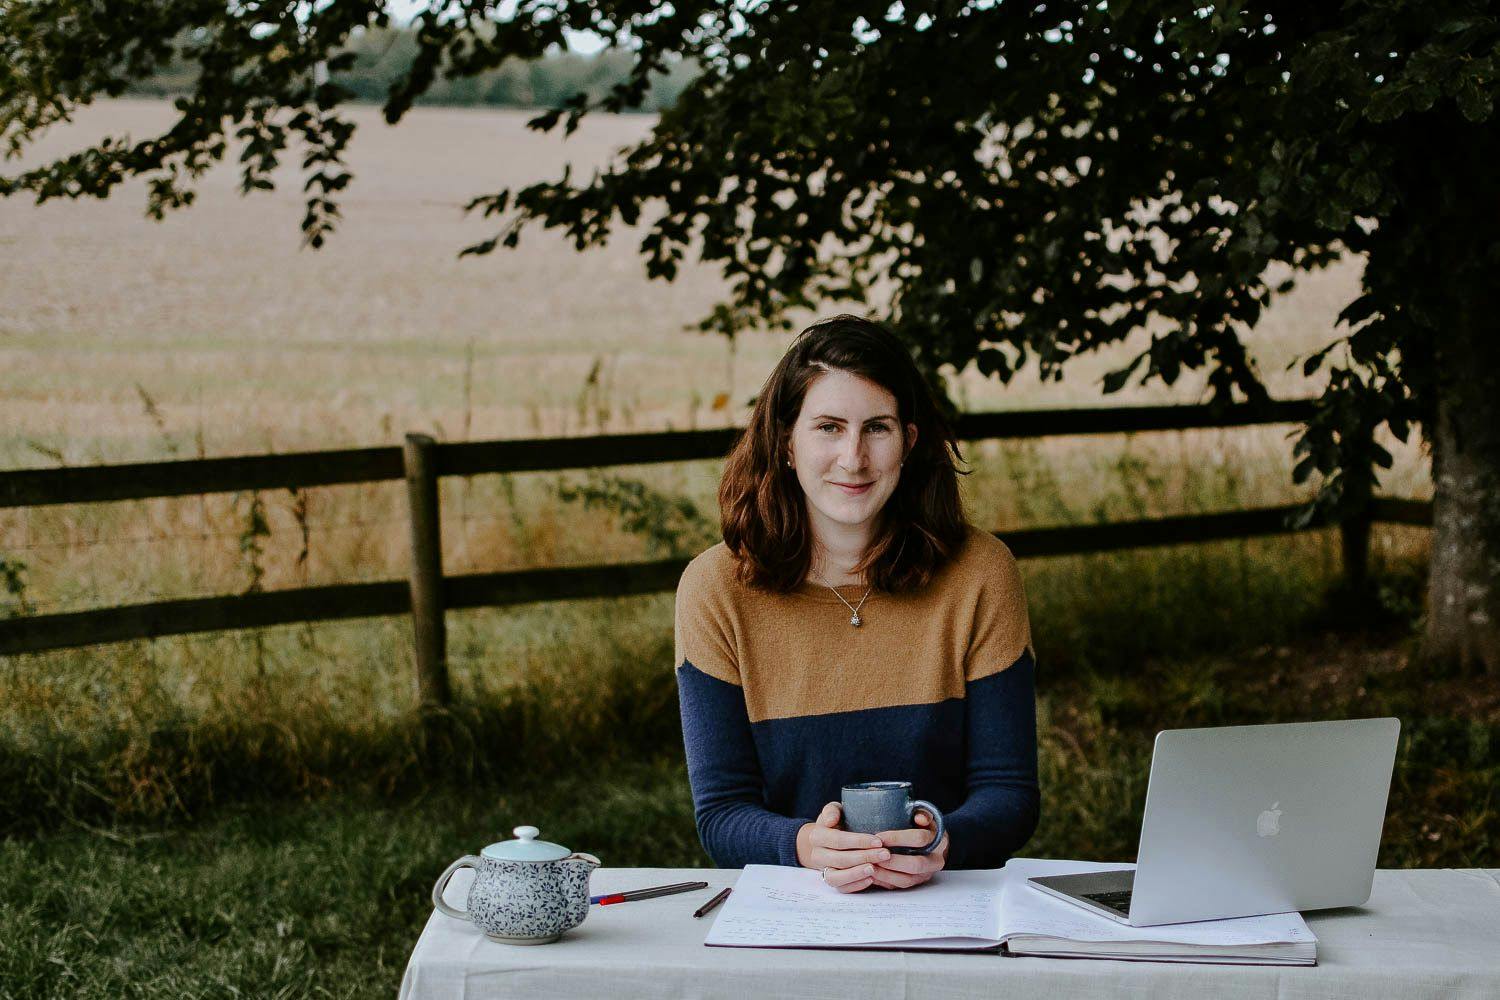 Josephine is sitting outside at a table with her laptop. She is holding a mug of tea and is smiling at the camera